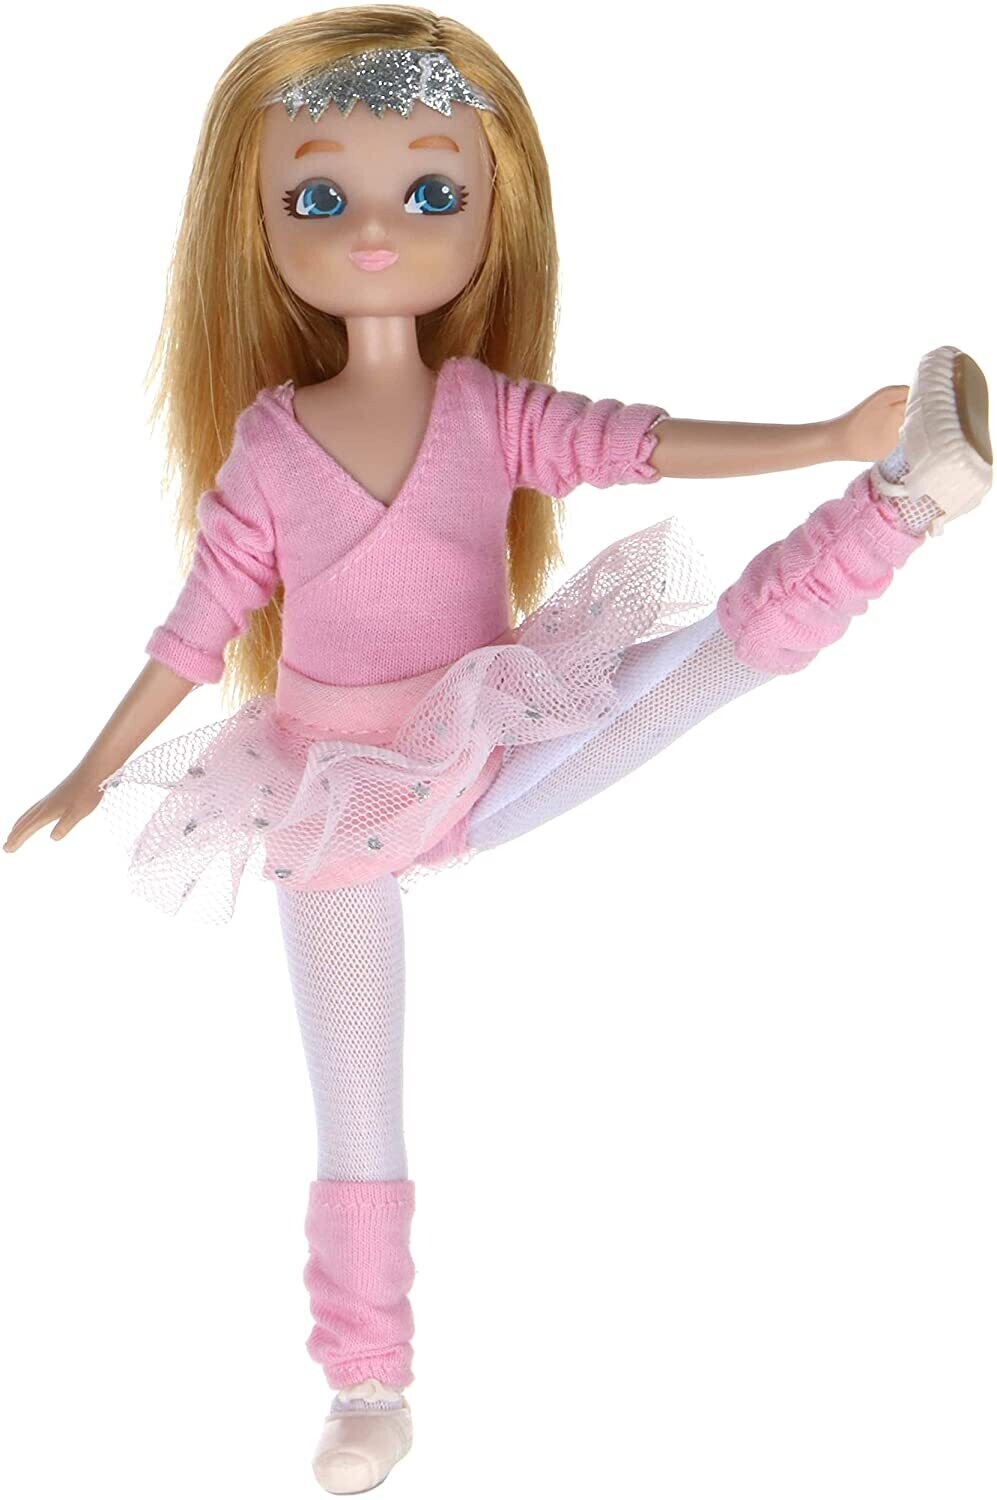 Perfect Ballet Toys For Girls And Boys